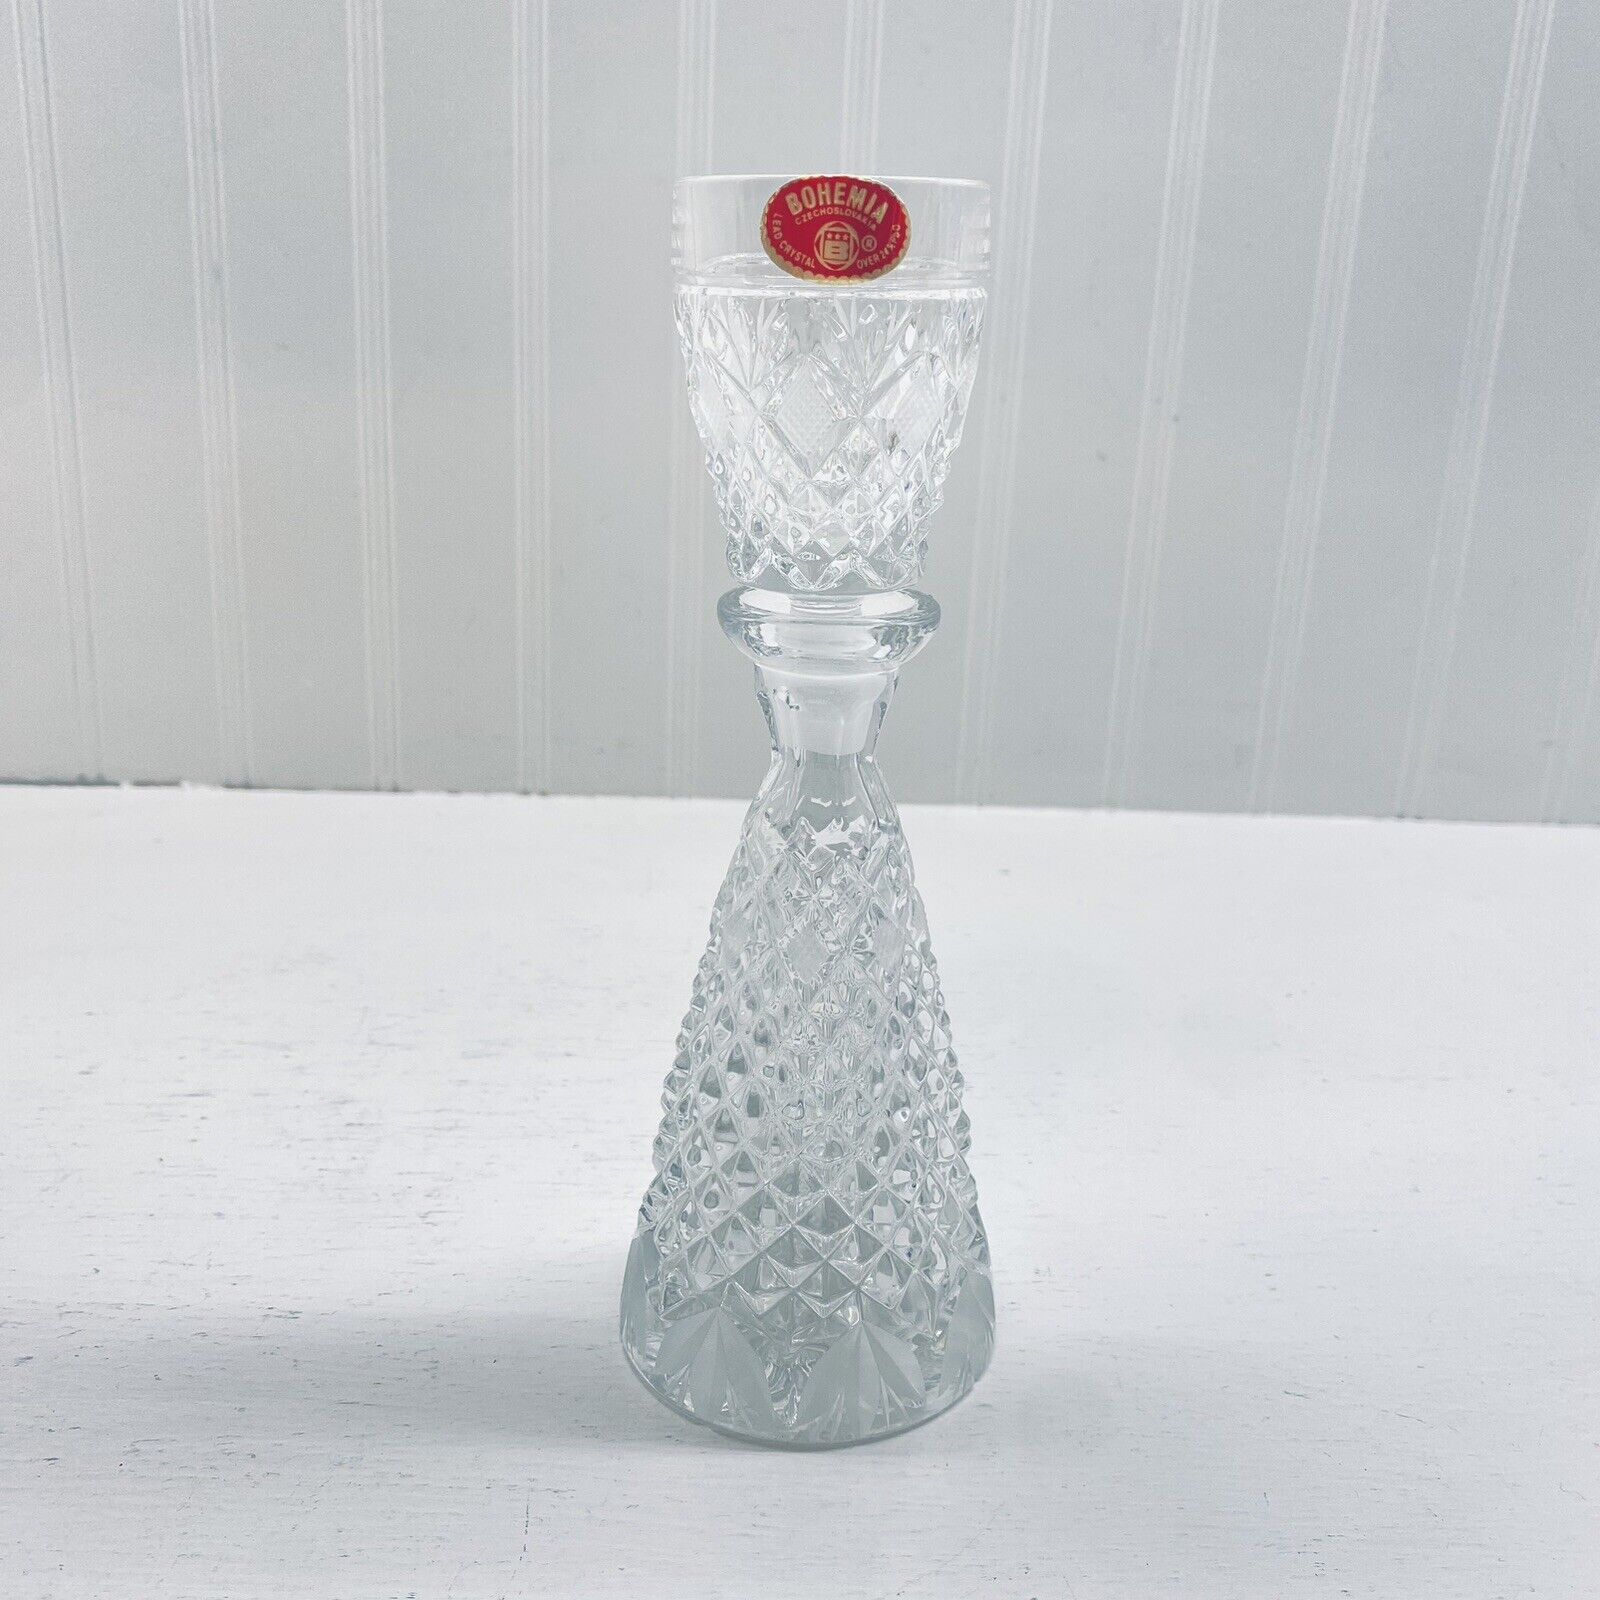 Vintage Rare Bohemia Lead Crystal Decanter With Shot Glass Stopper 7 1/2” Tall